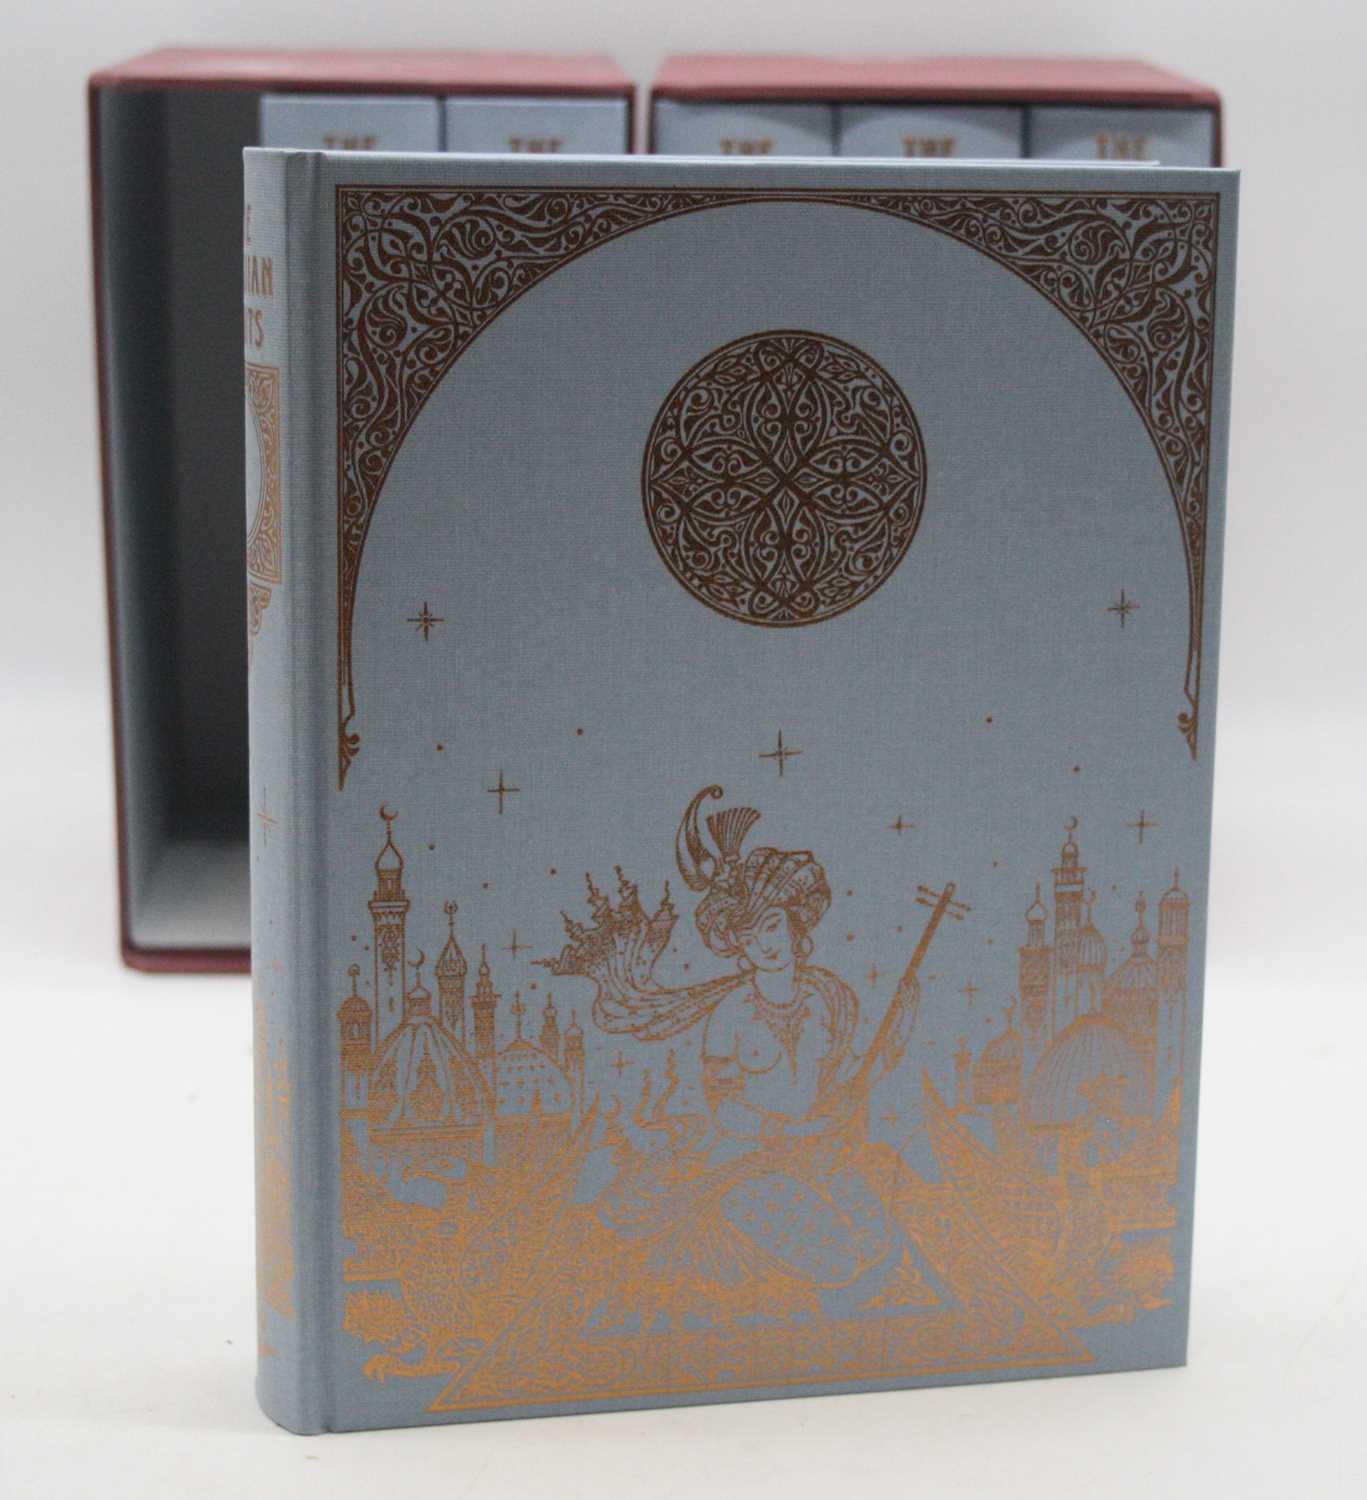 The Arabian Nights, The Book of the Thousand Nights and One Night, London, The Folio Society, - Image 2 of 3